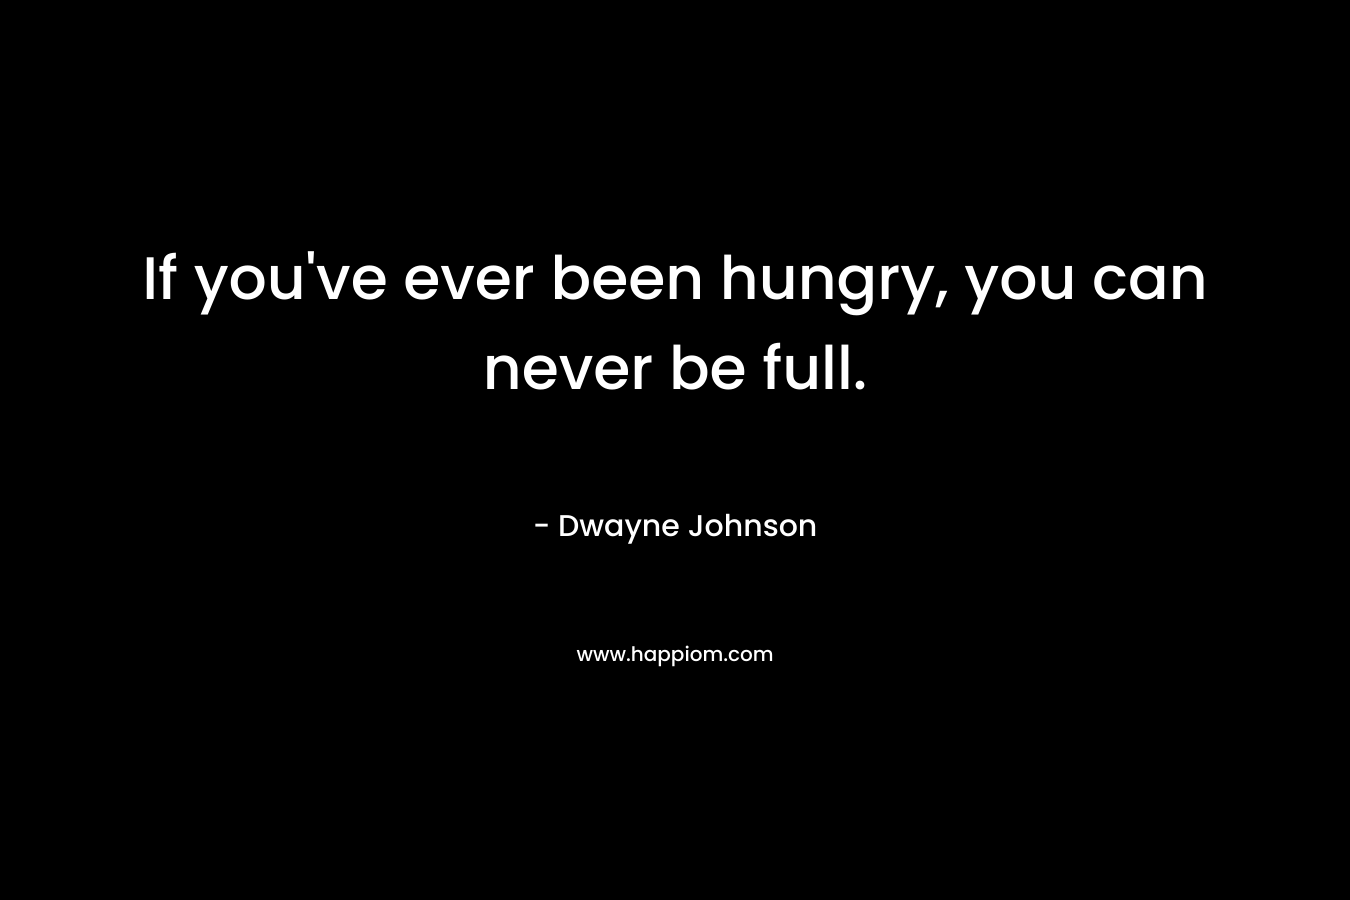 If you’ve ever been hungry, you can never be full. – Dwayne Johnson